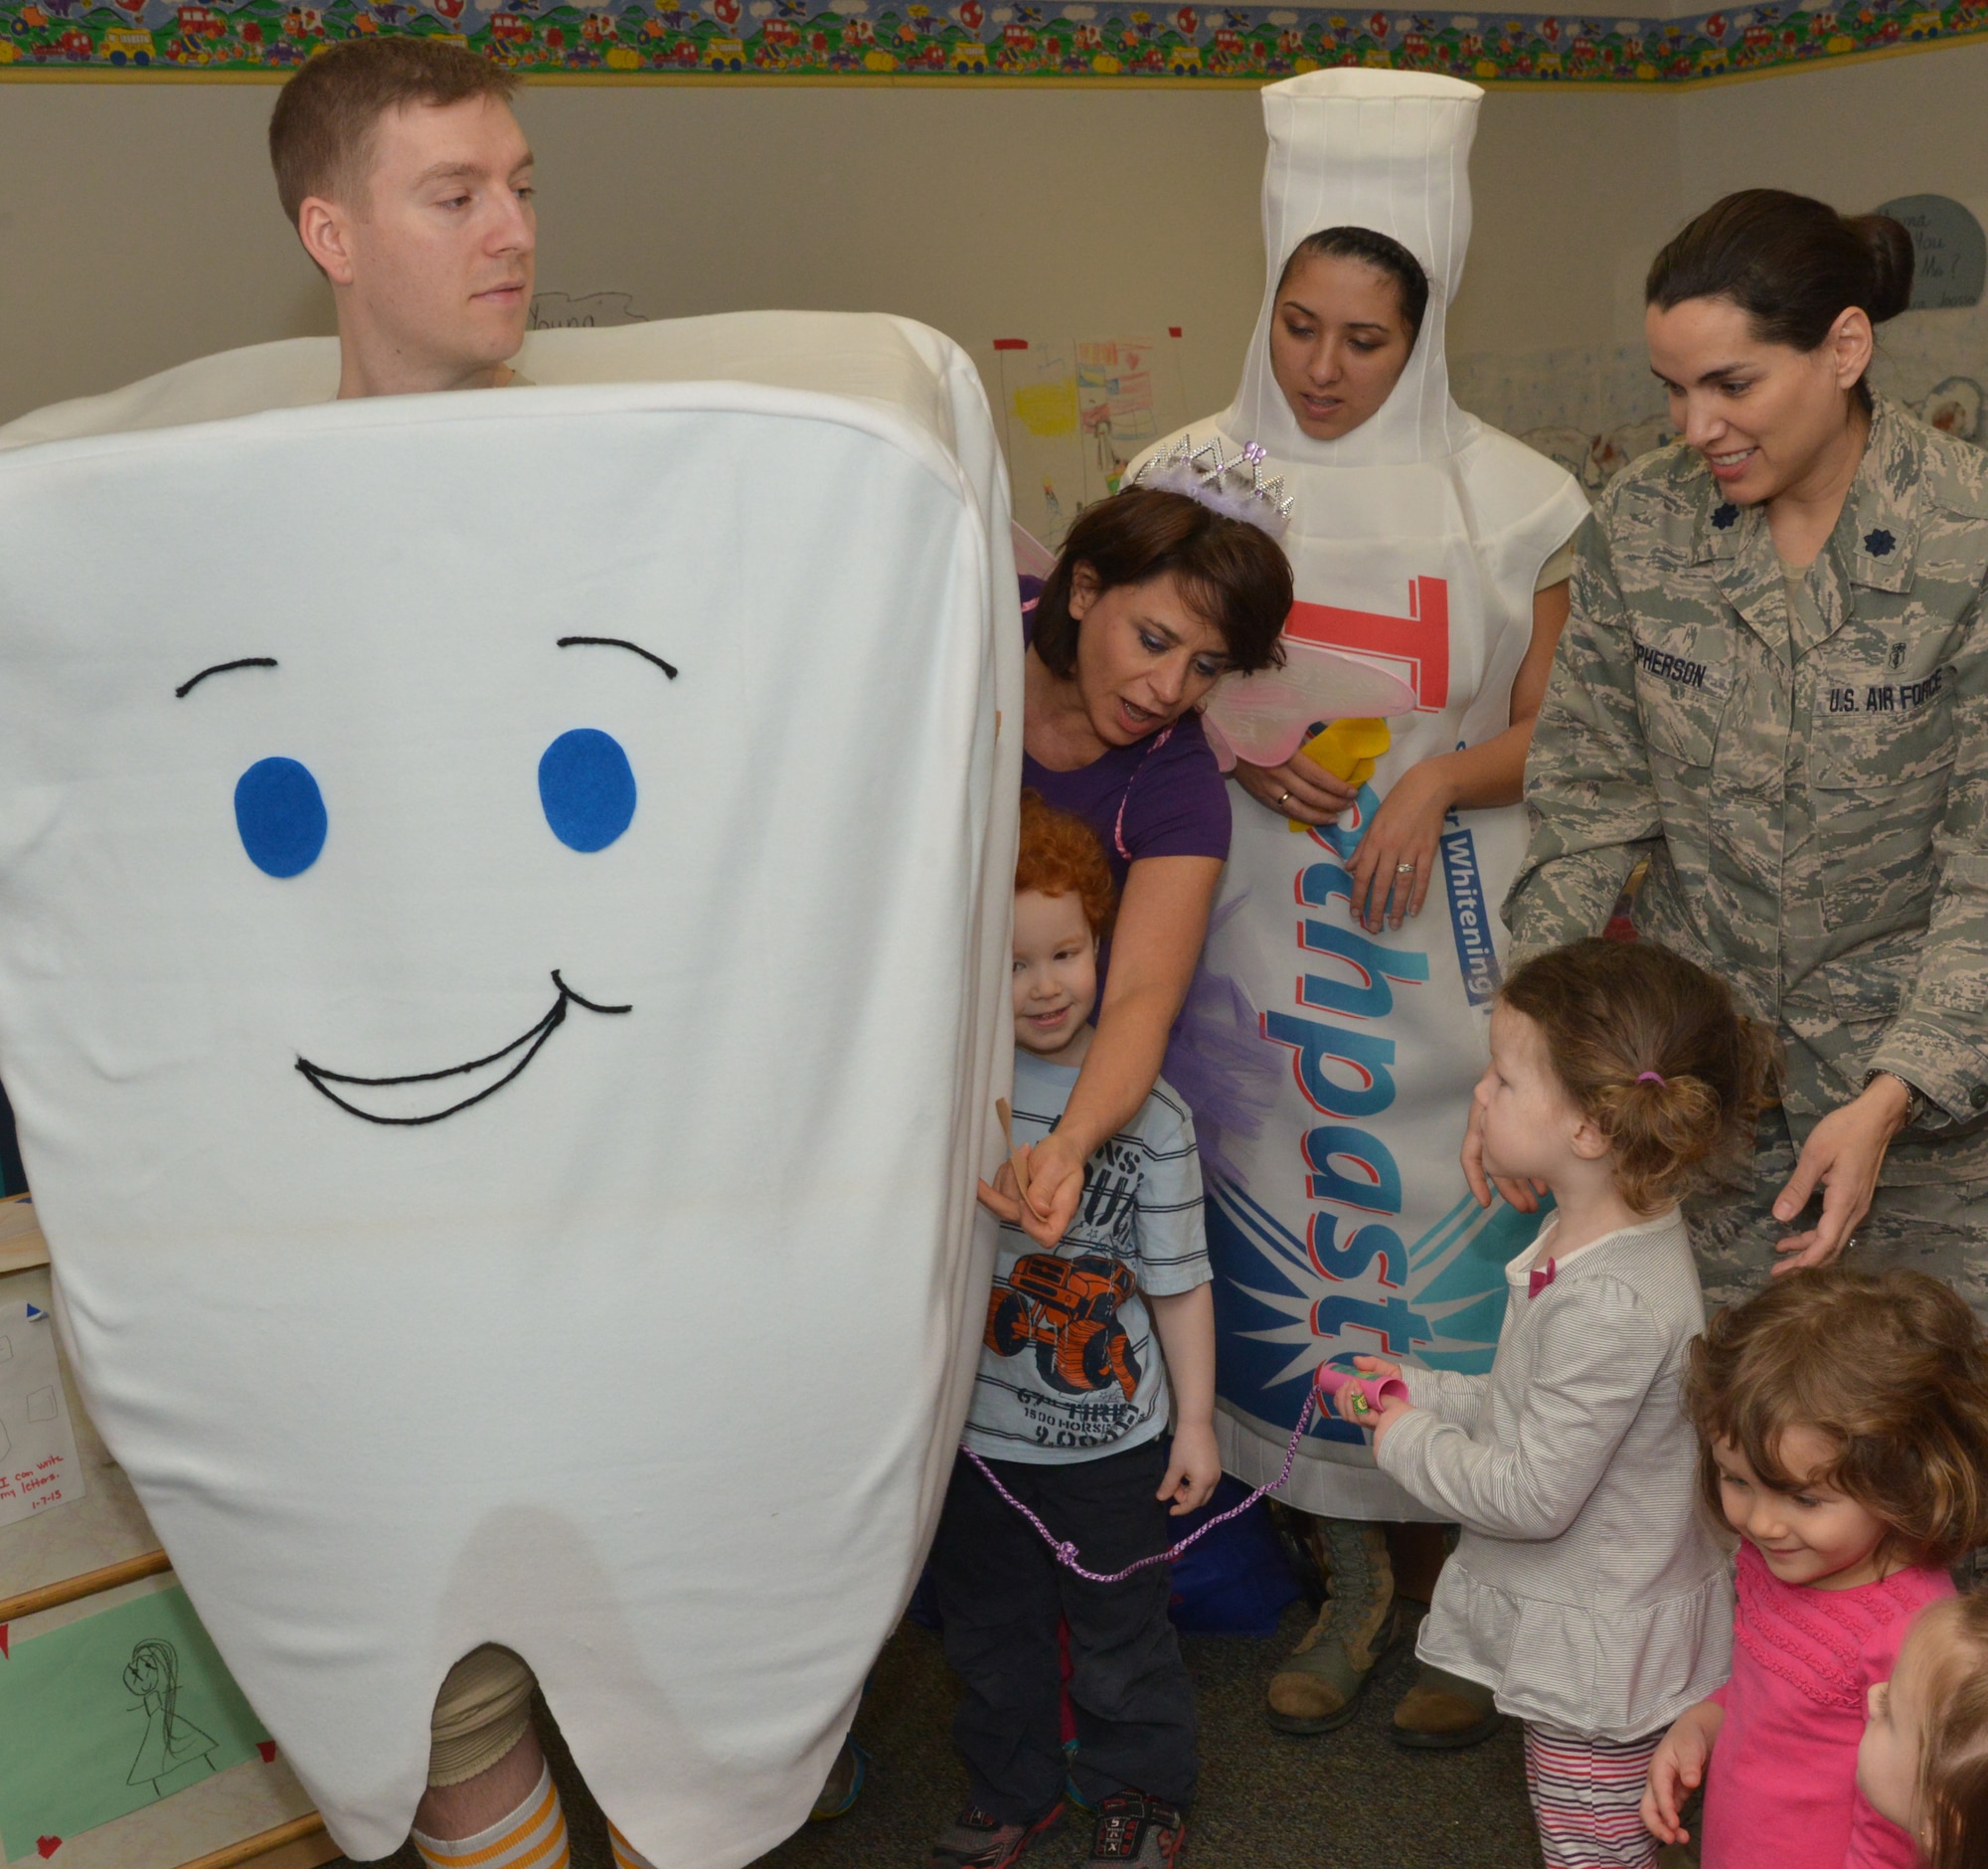 Students practice flossing with Timmy the Tooth played by Senior Airman Philip Madison, February 10, 2015. (U.S. Air Force photo by Ray Crayton)